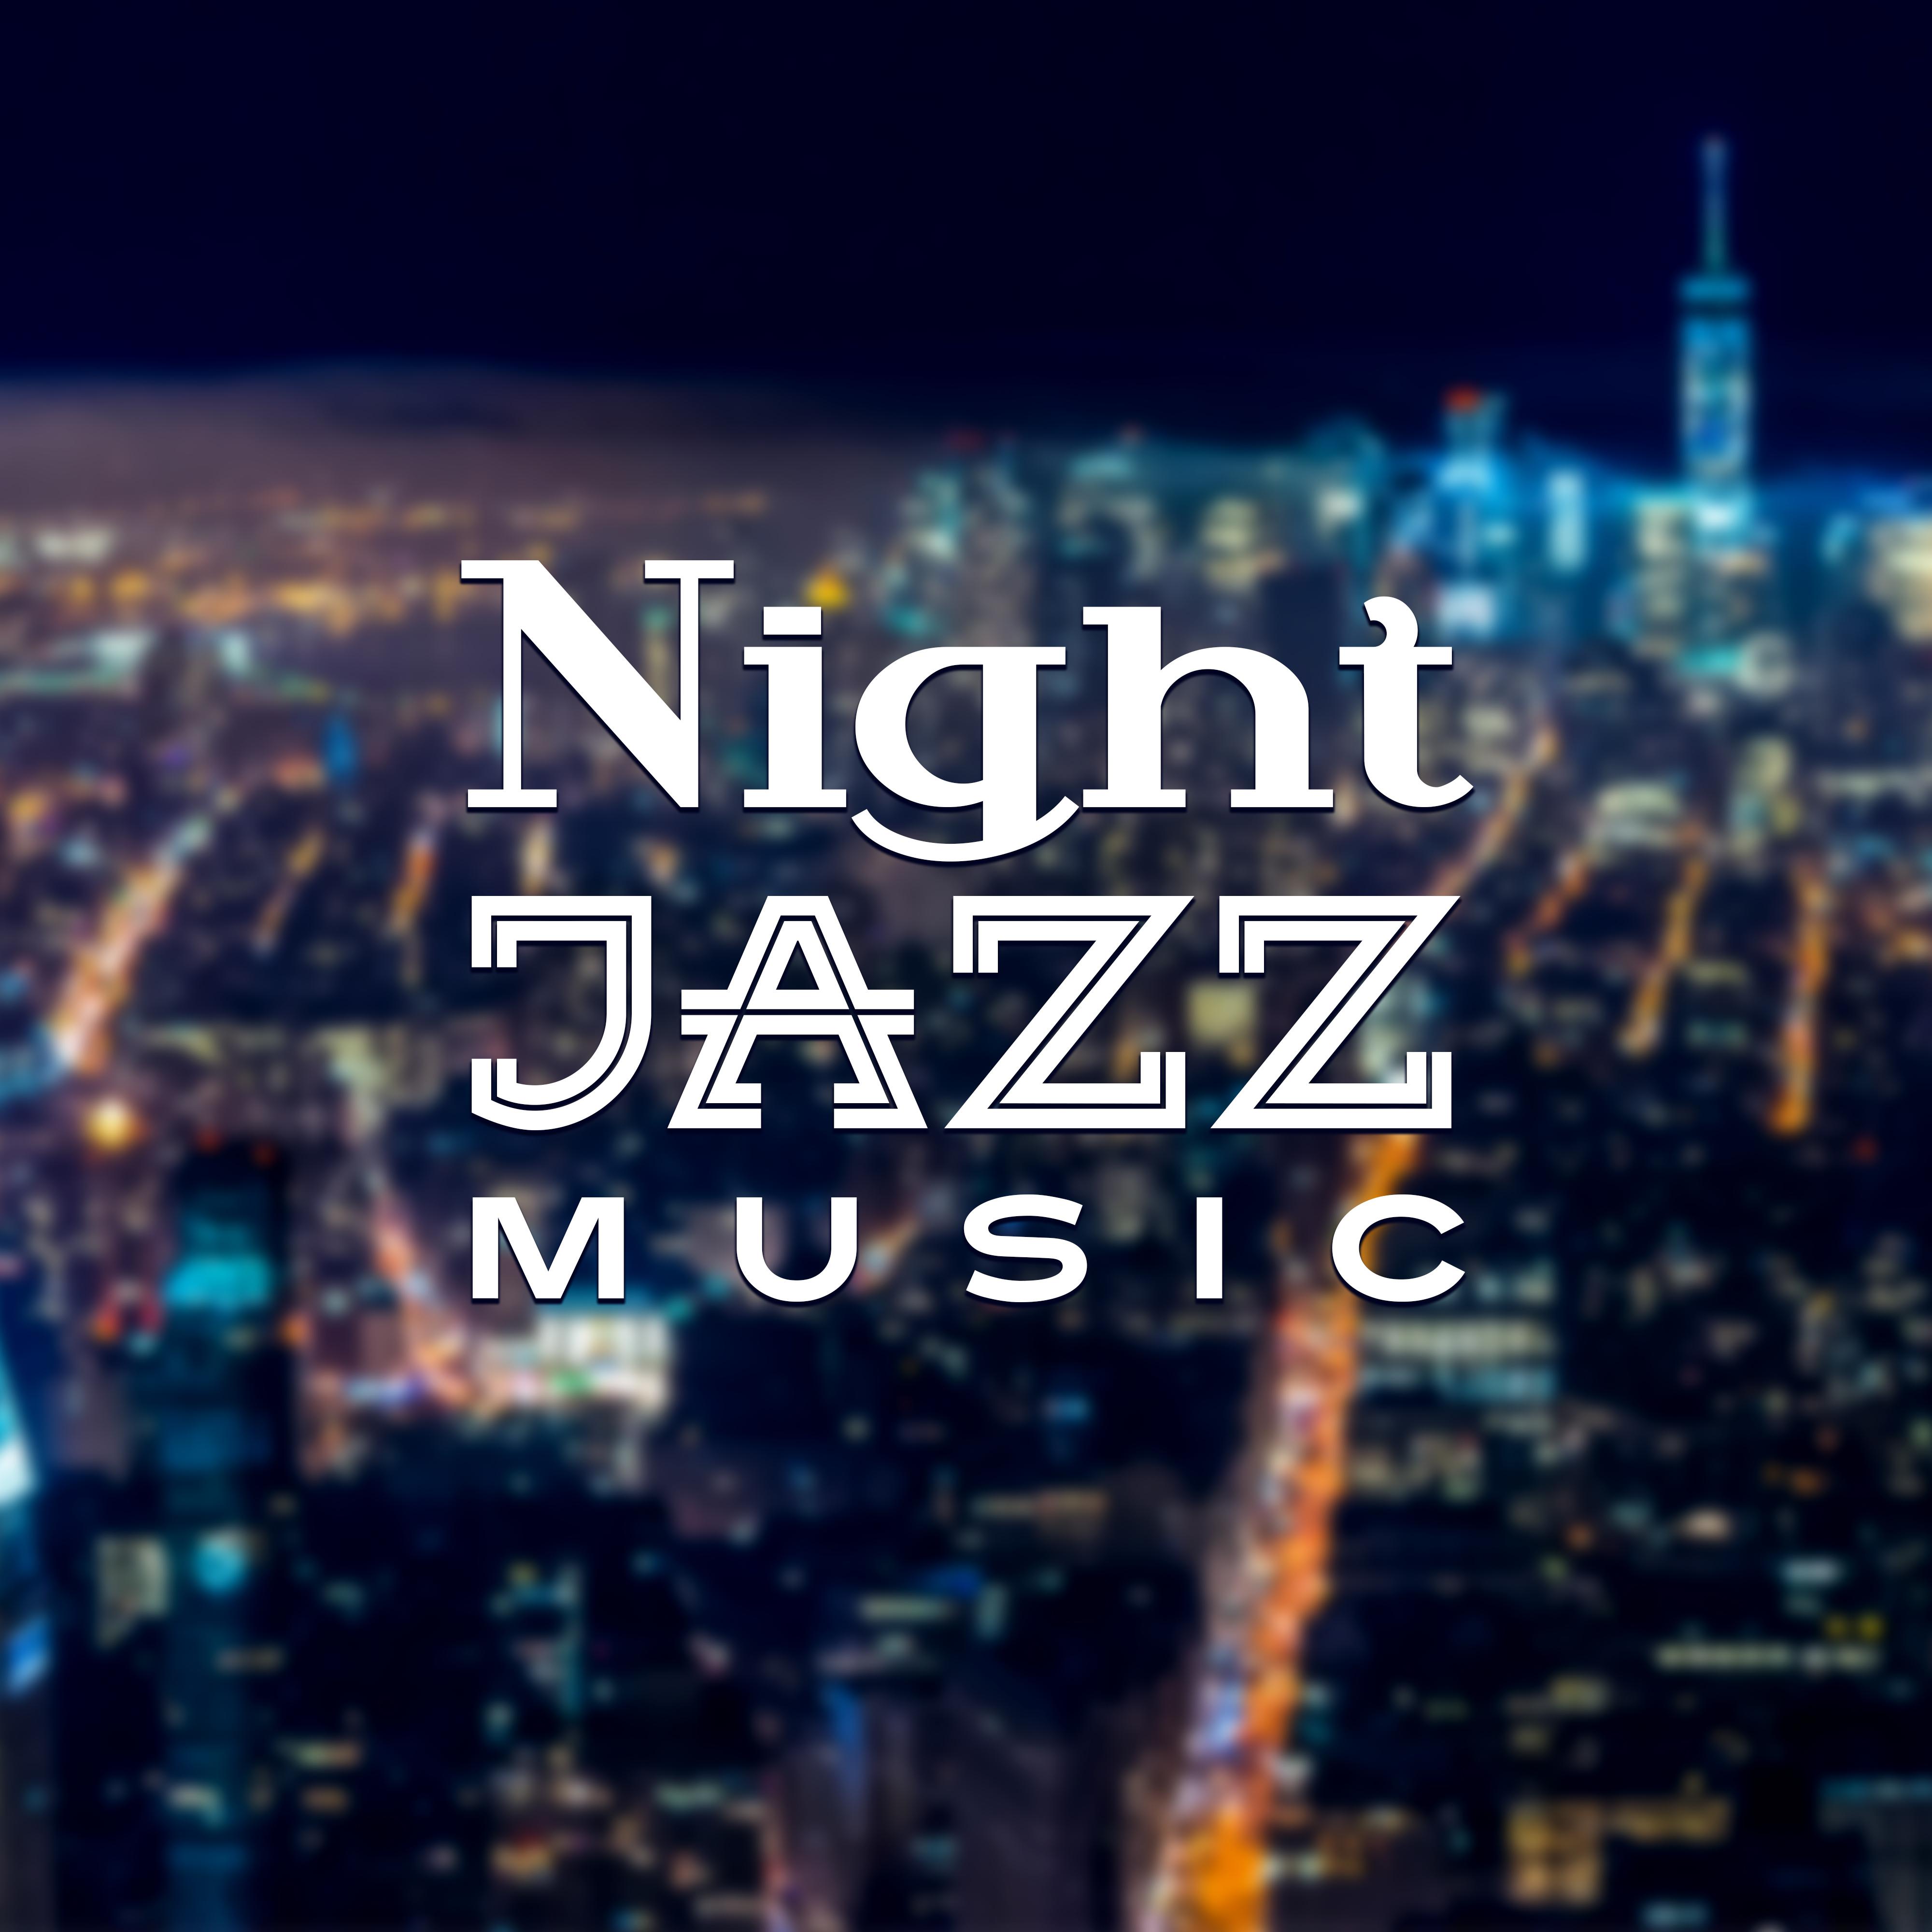 Night Jazz Music  Smooth Sounds of Jazz, Relaxing Memories, Stress Relief, Peaceful Music